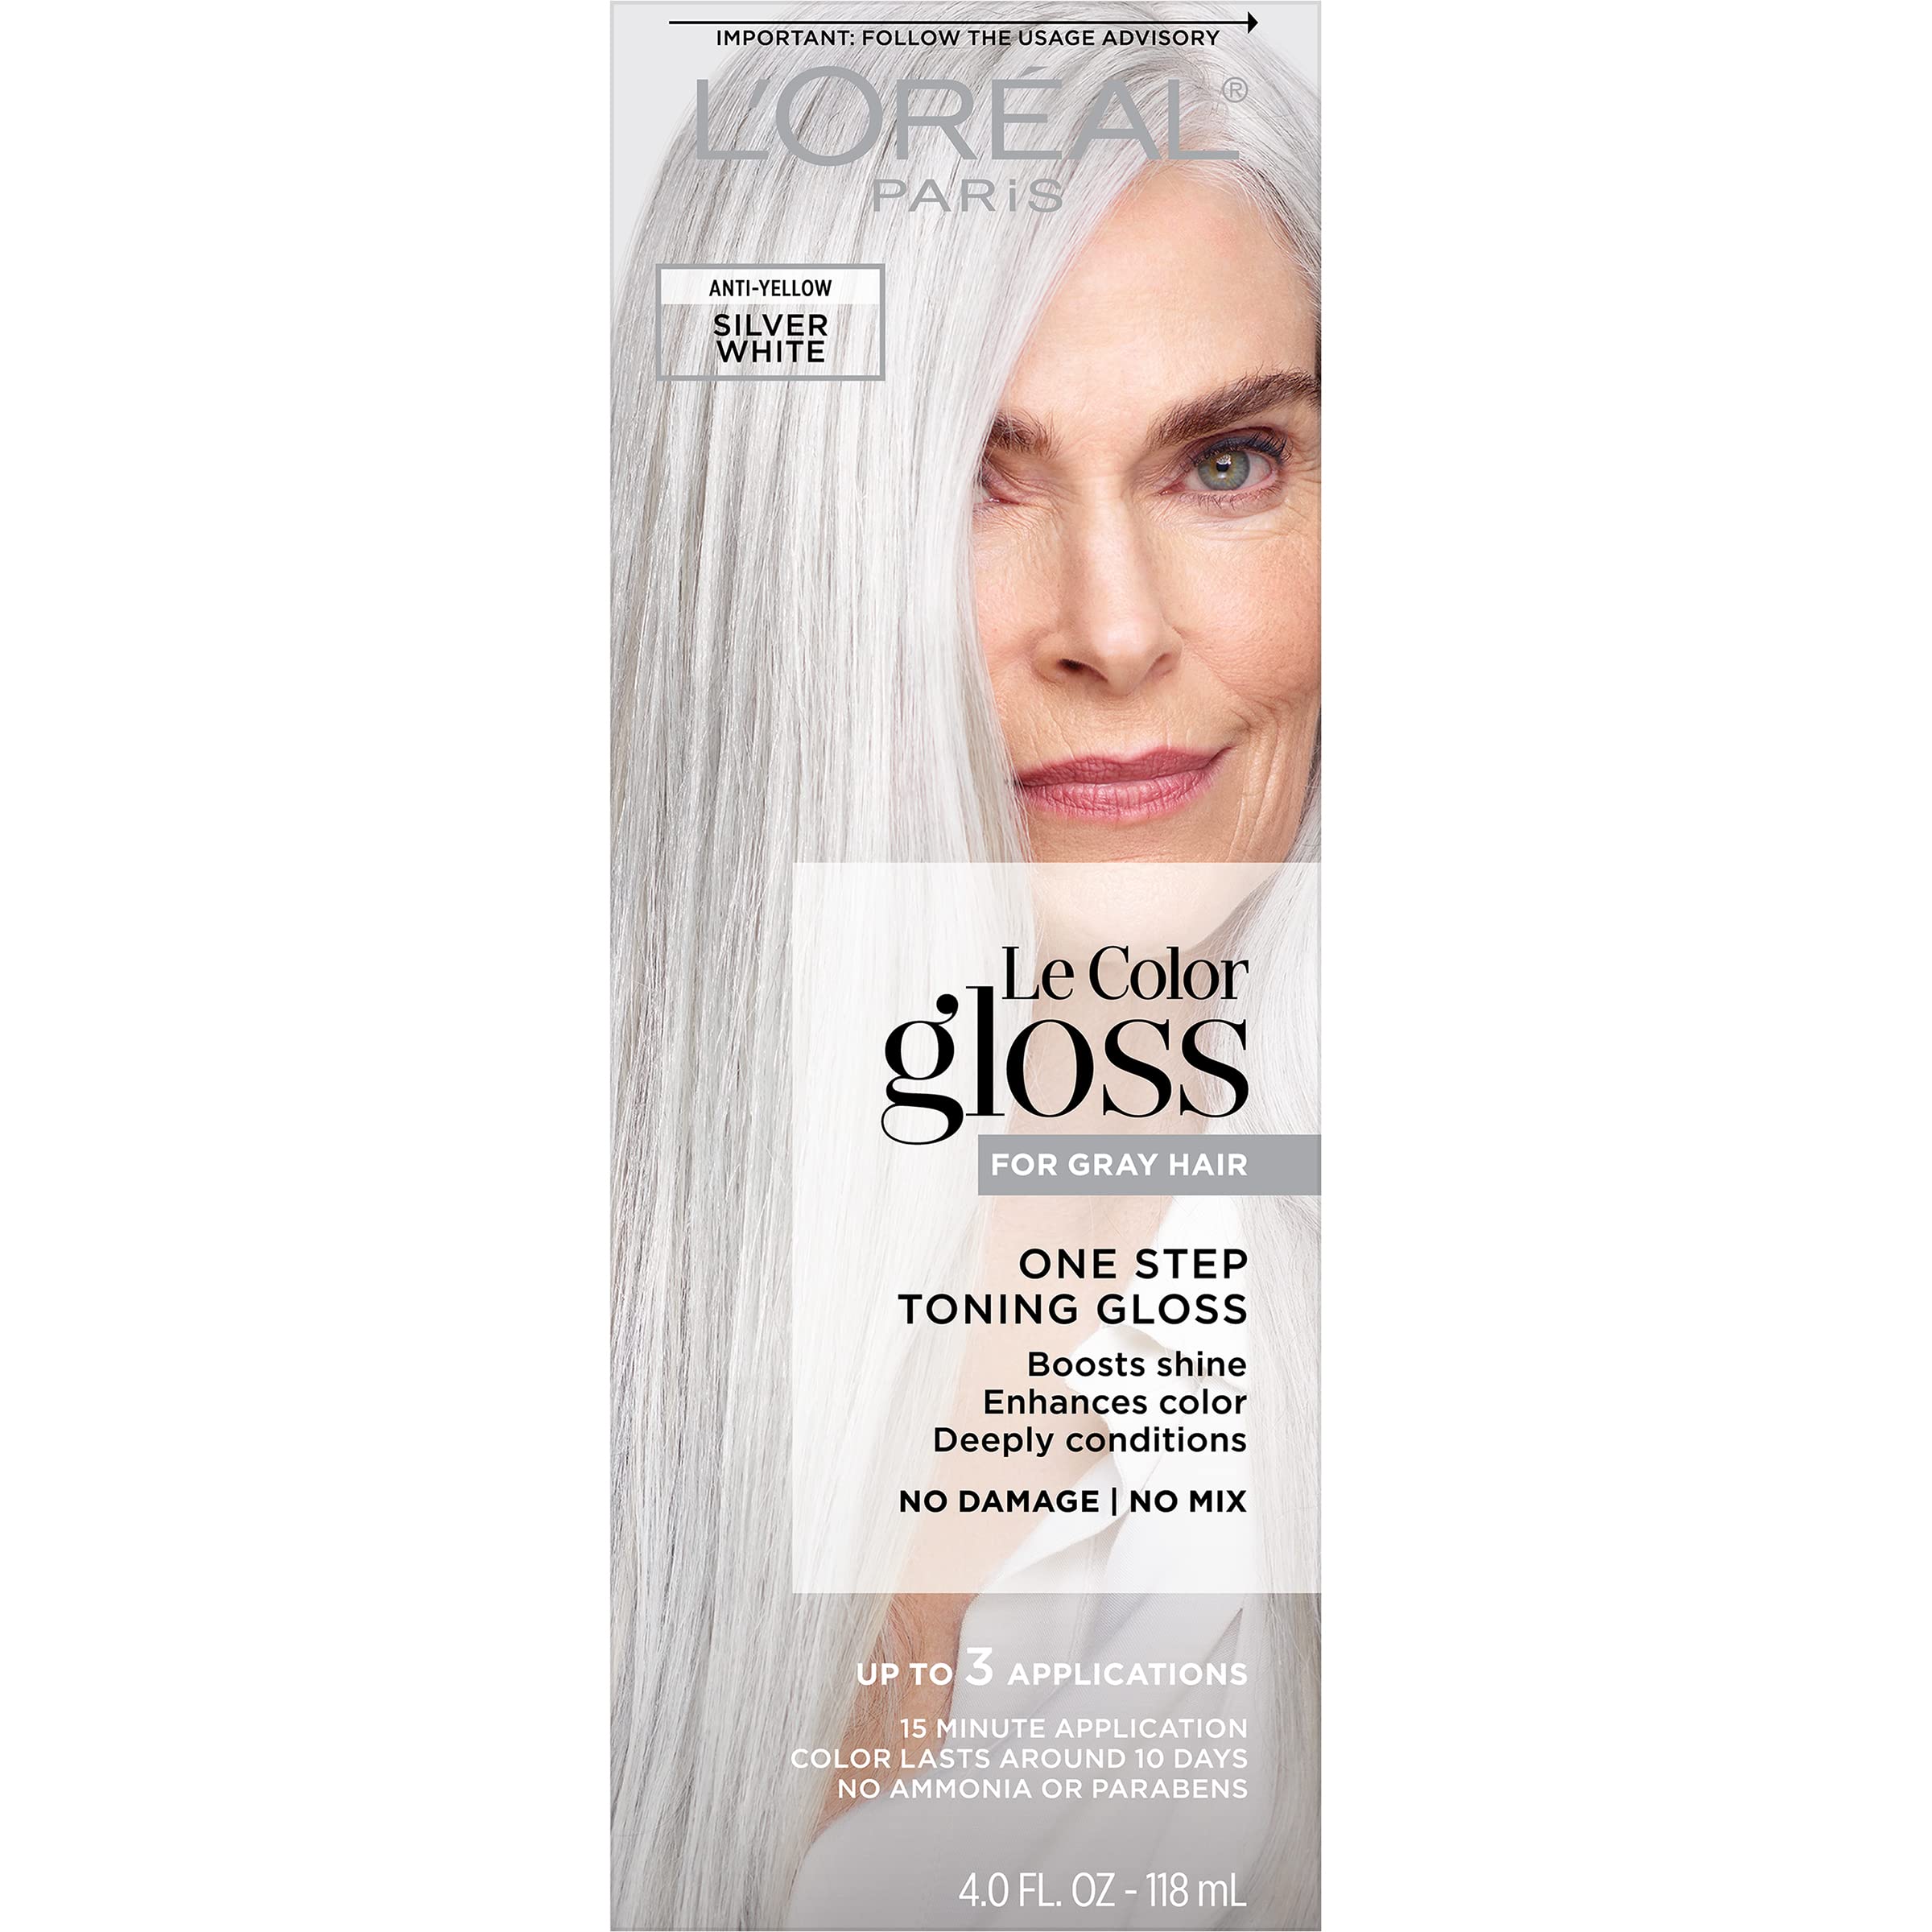 L’Oréal Paris Le Color Gloss One Step Toning Gloss, In-Shower Hair Toner with Deep Conditioning Treatment Formula for Gray Hair, Silver White, 1 Kit, 32.626 cubic_inches